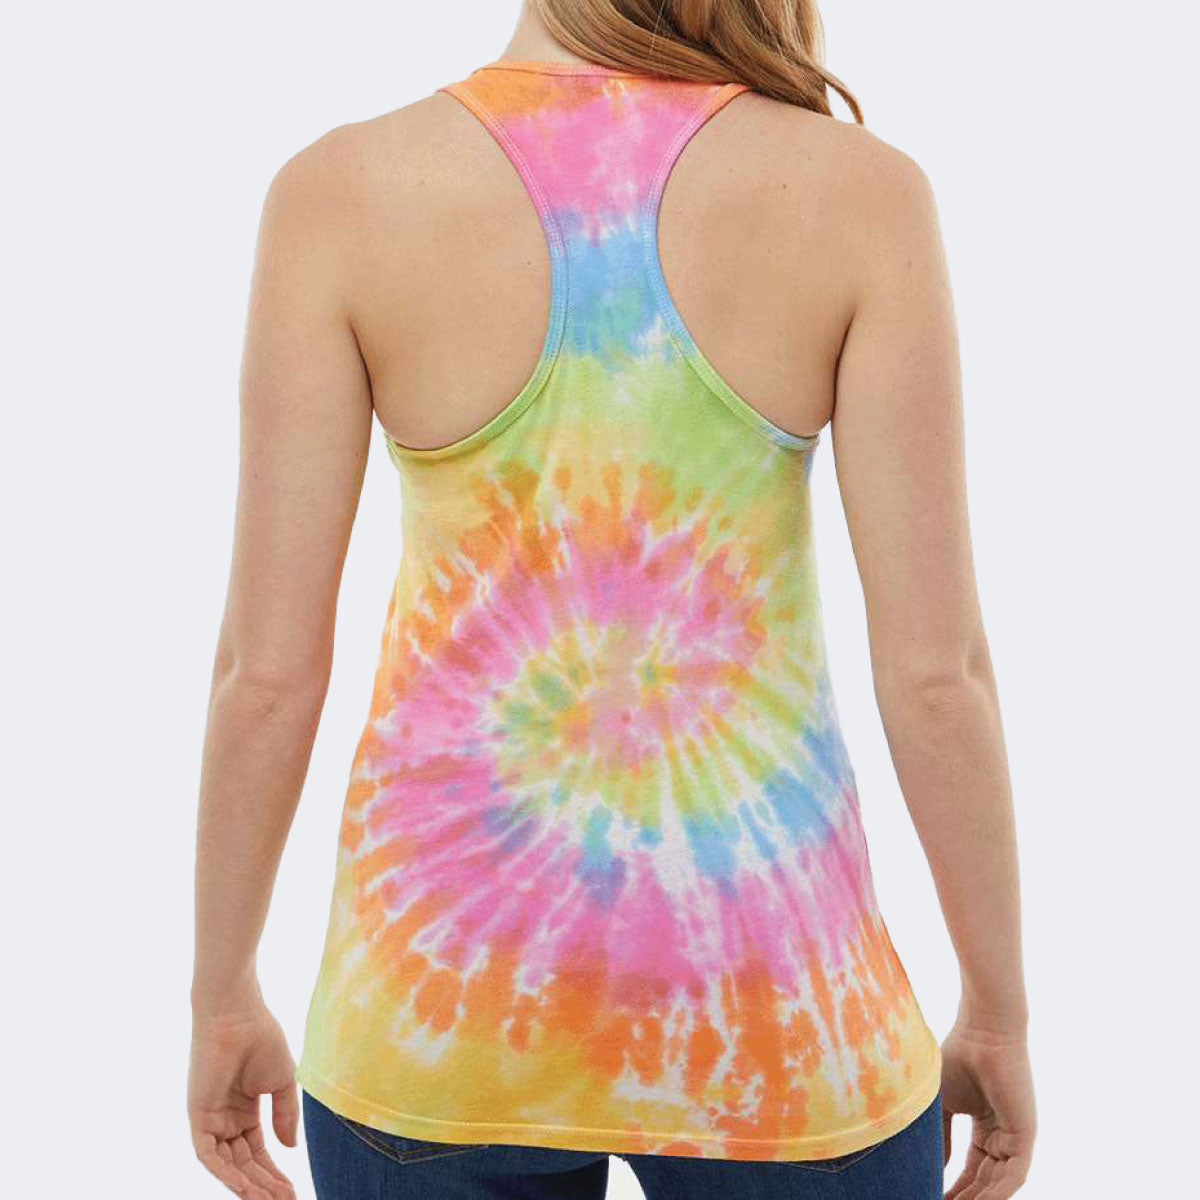 Am I Jacked Yet Tie-Dyed Racerback Tank Top